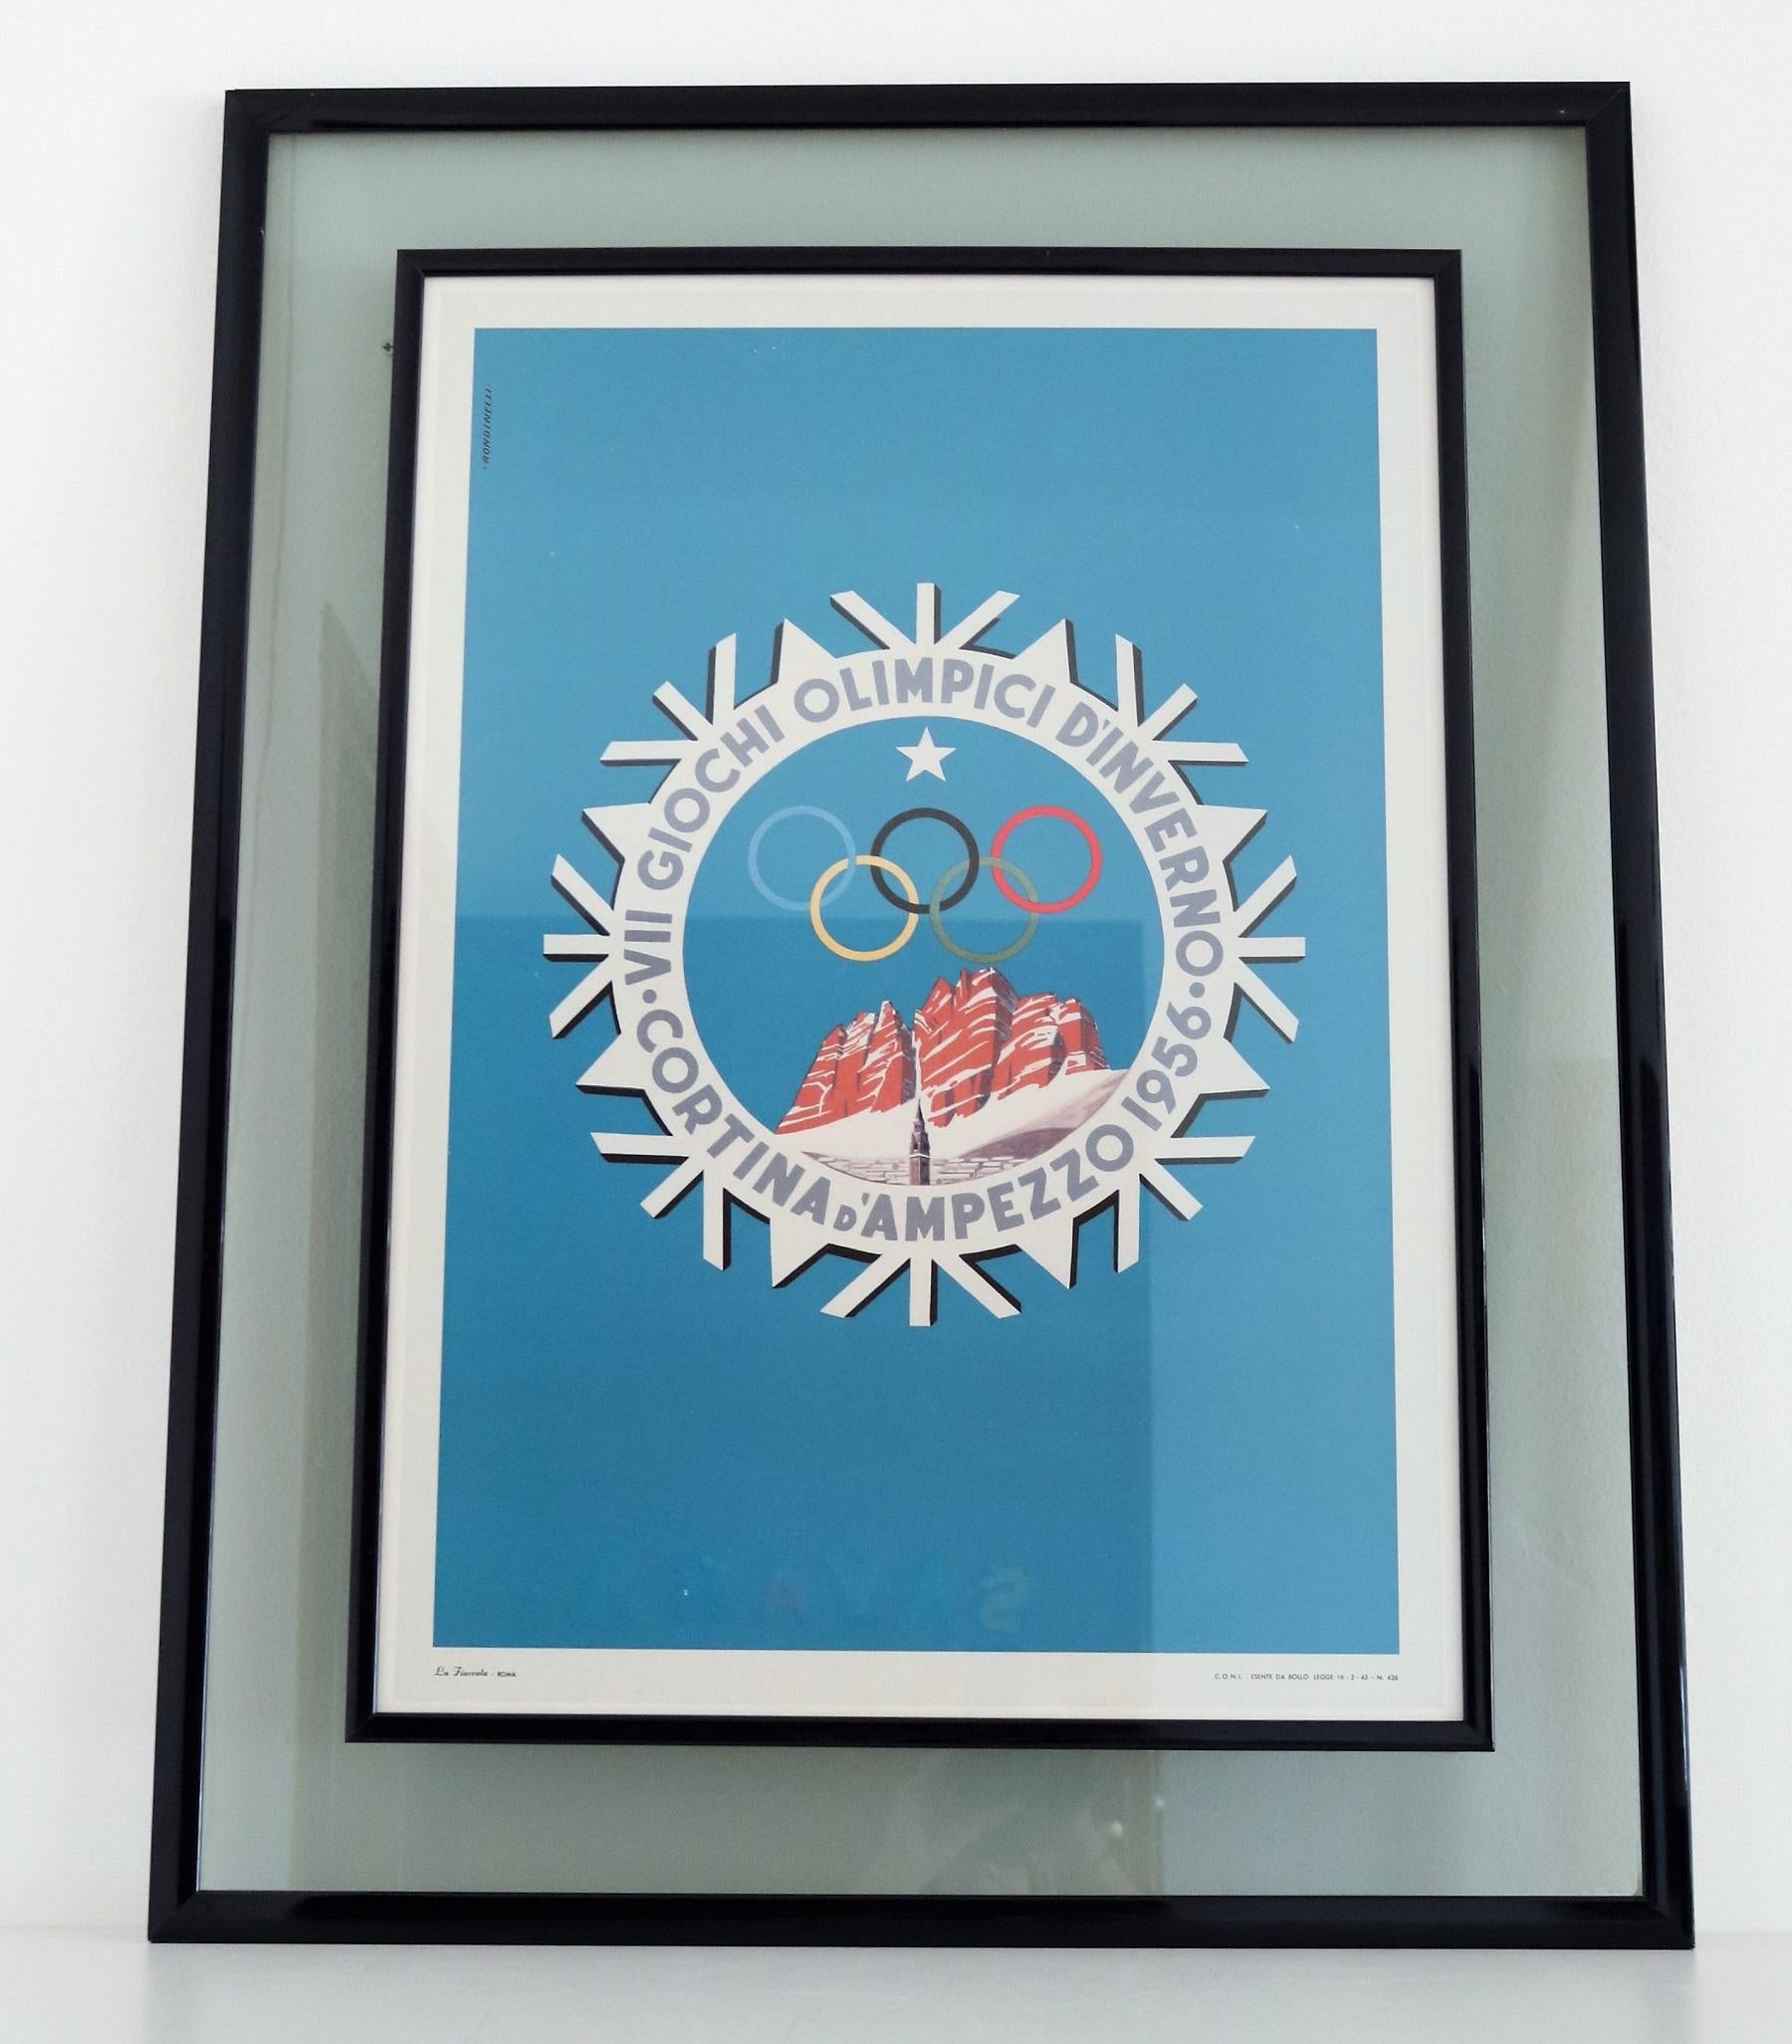 Vintage Poster Olympic Games Winter Cortina d'Ampezzo, Italy 1956, Double Framed 2